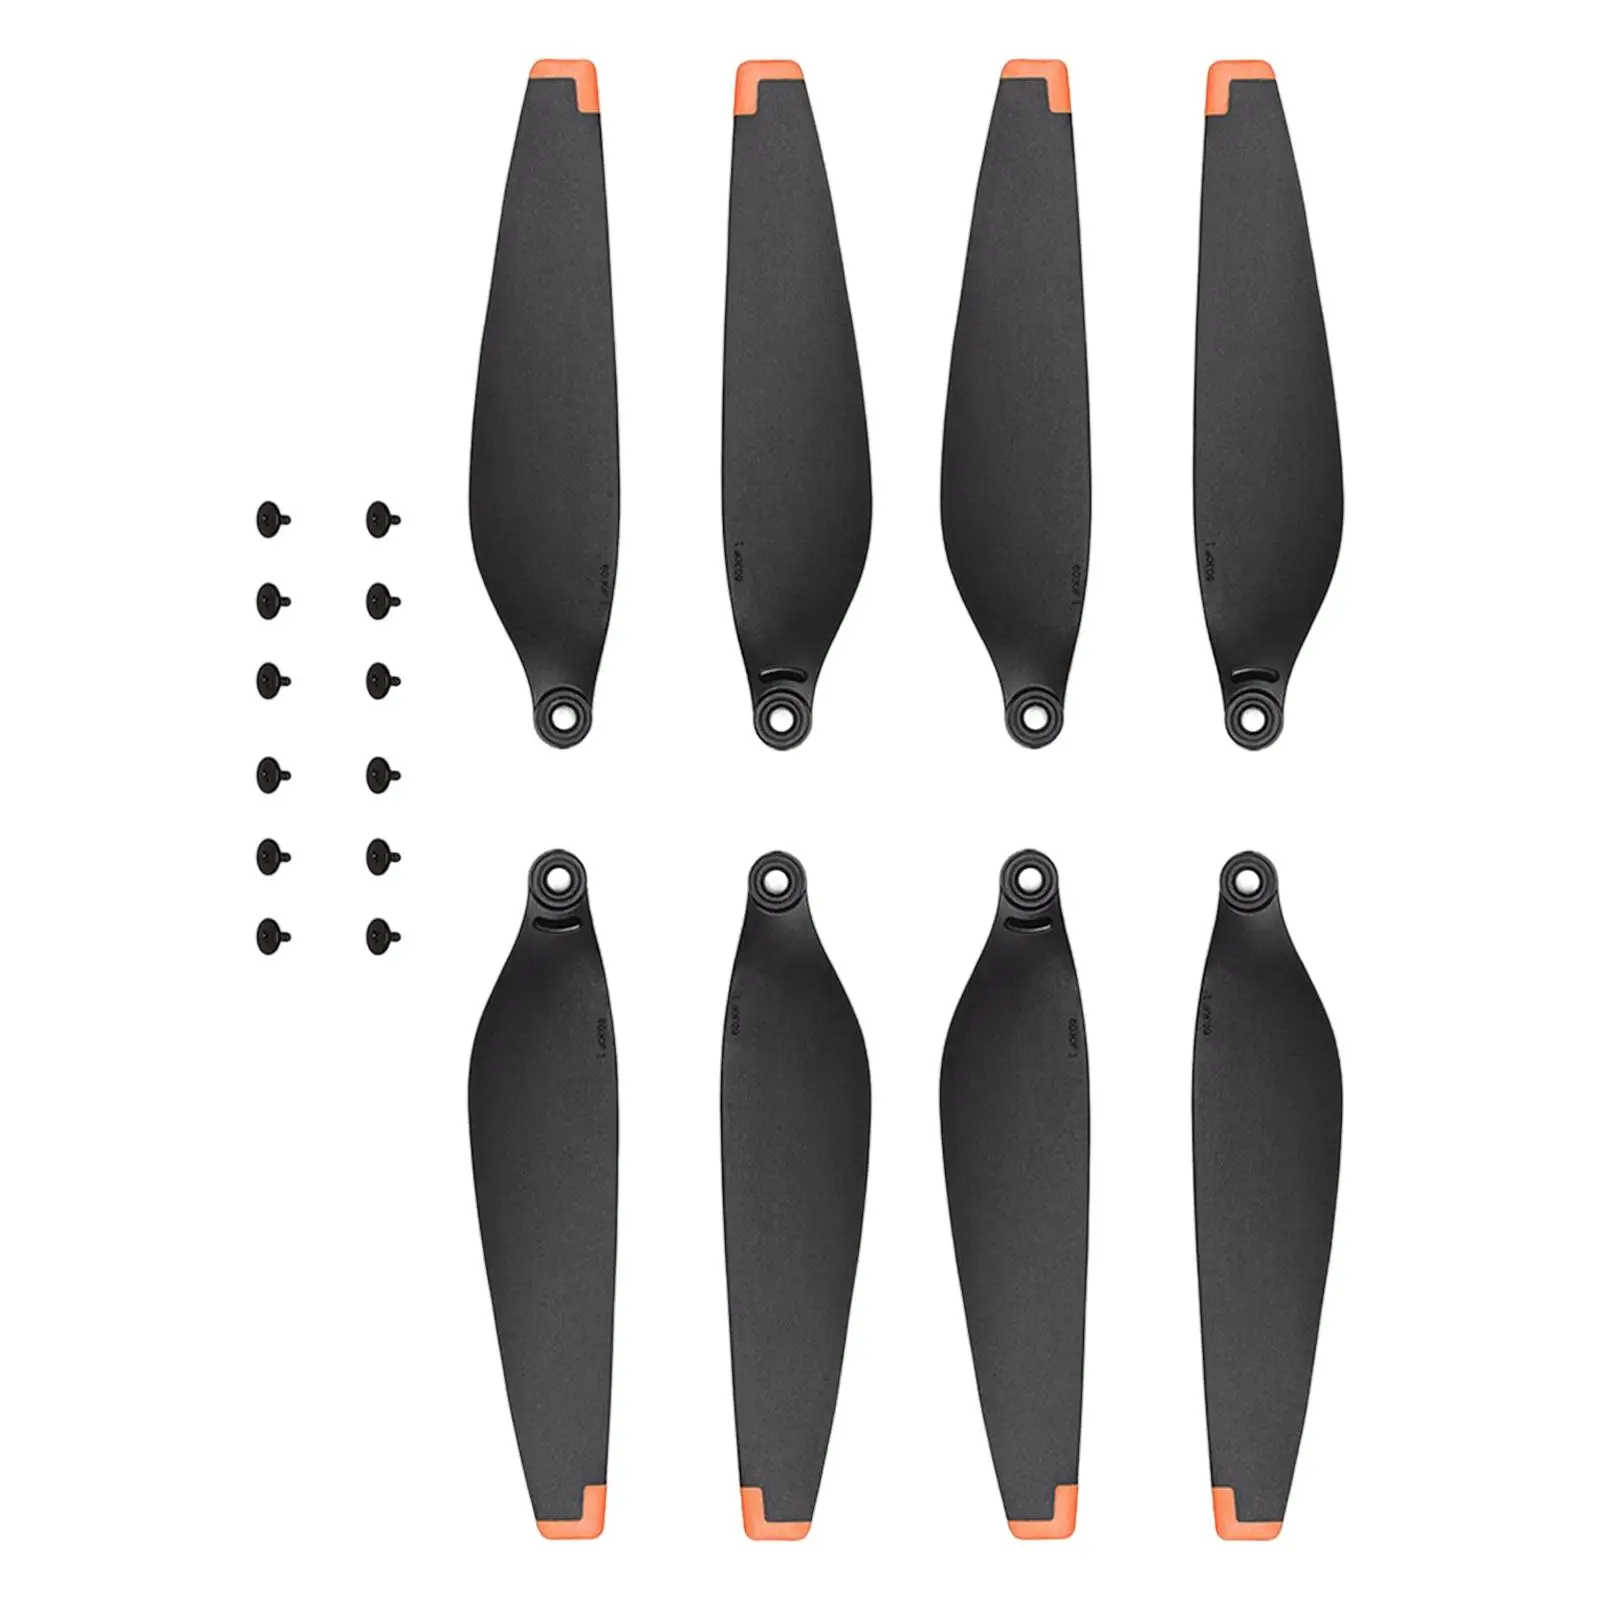 2 Pairs Smart Aircraft Propellers Airscrew Blades Orange Tip Compact Replacement Blades for DJI Mini 3 Pro Drones Accessories